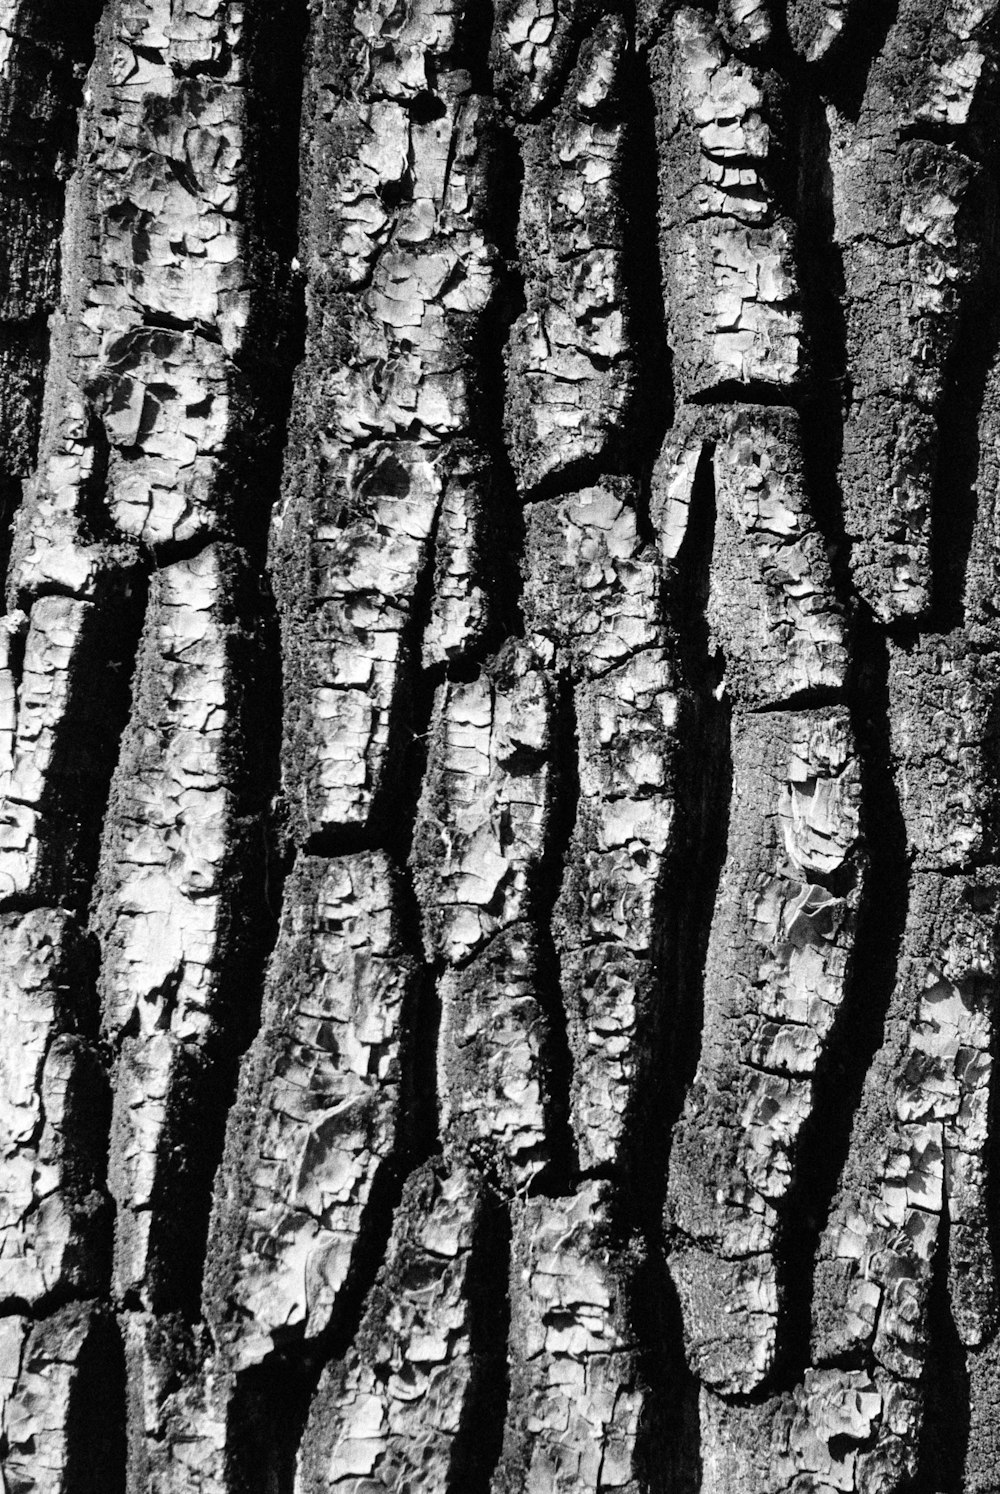 a black and white photo of the bark of a tree